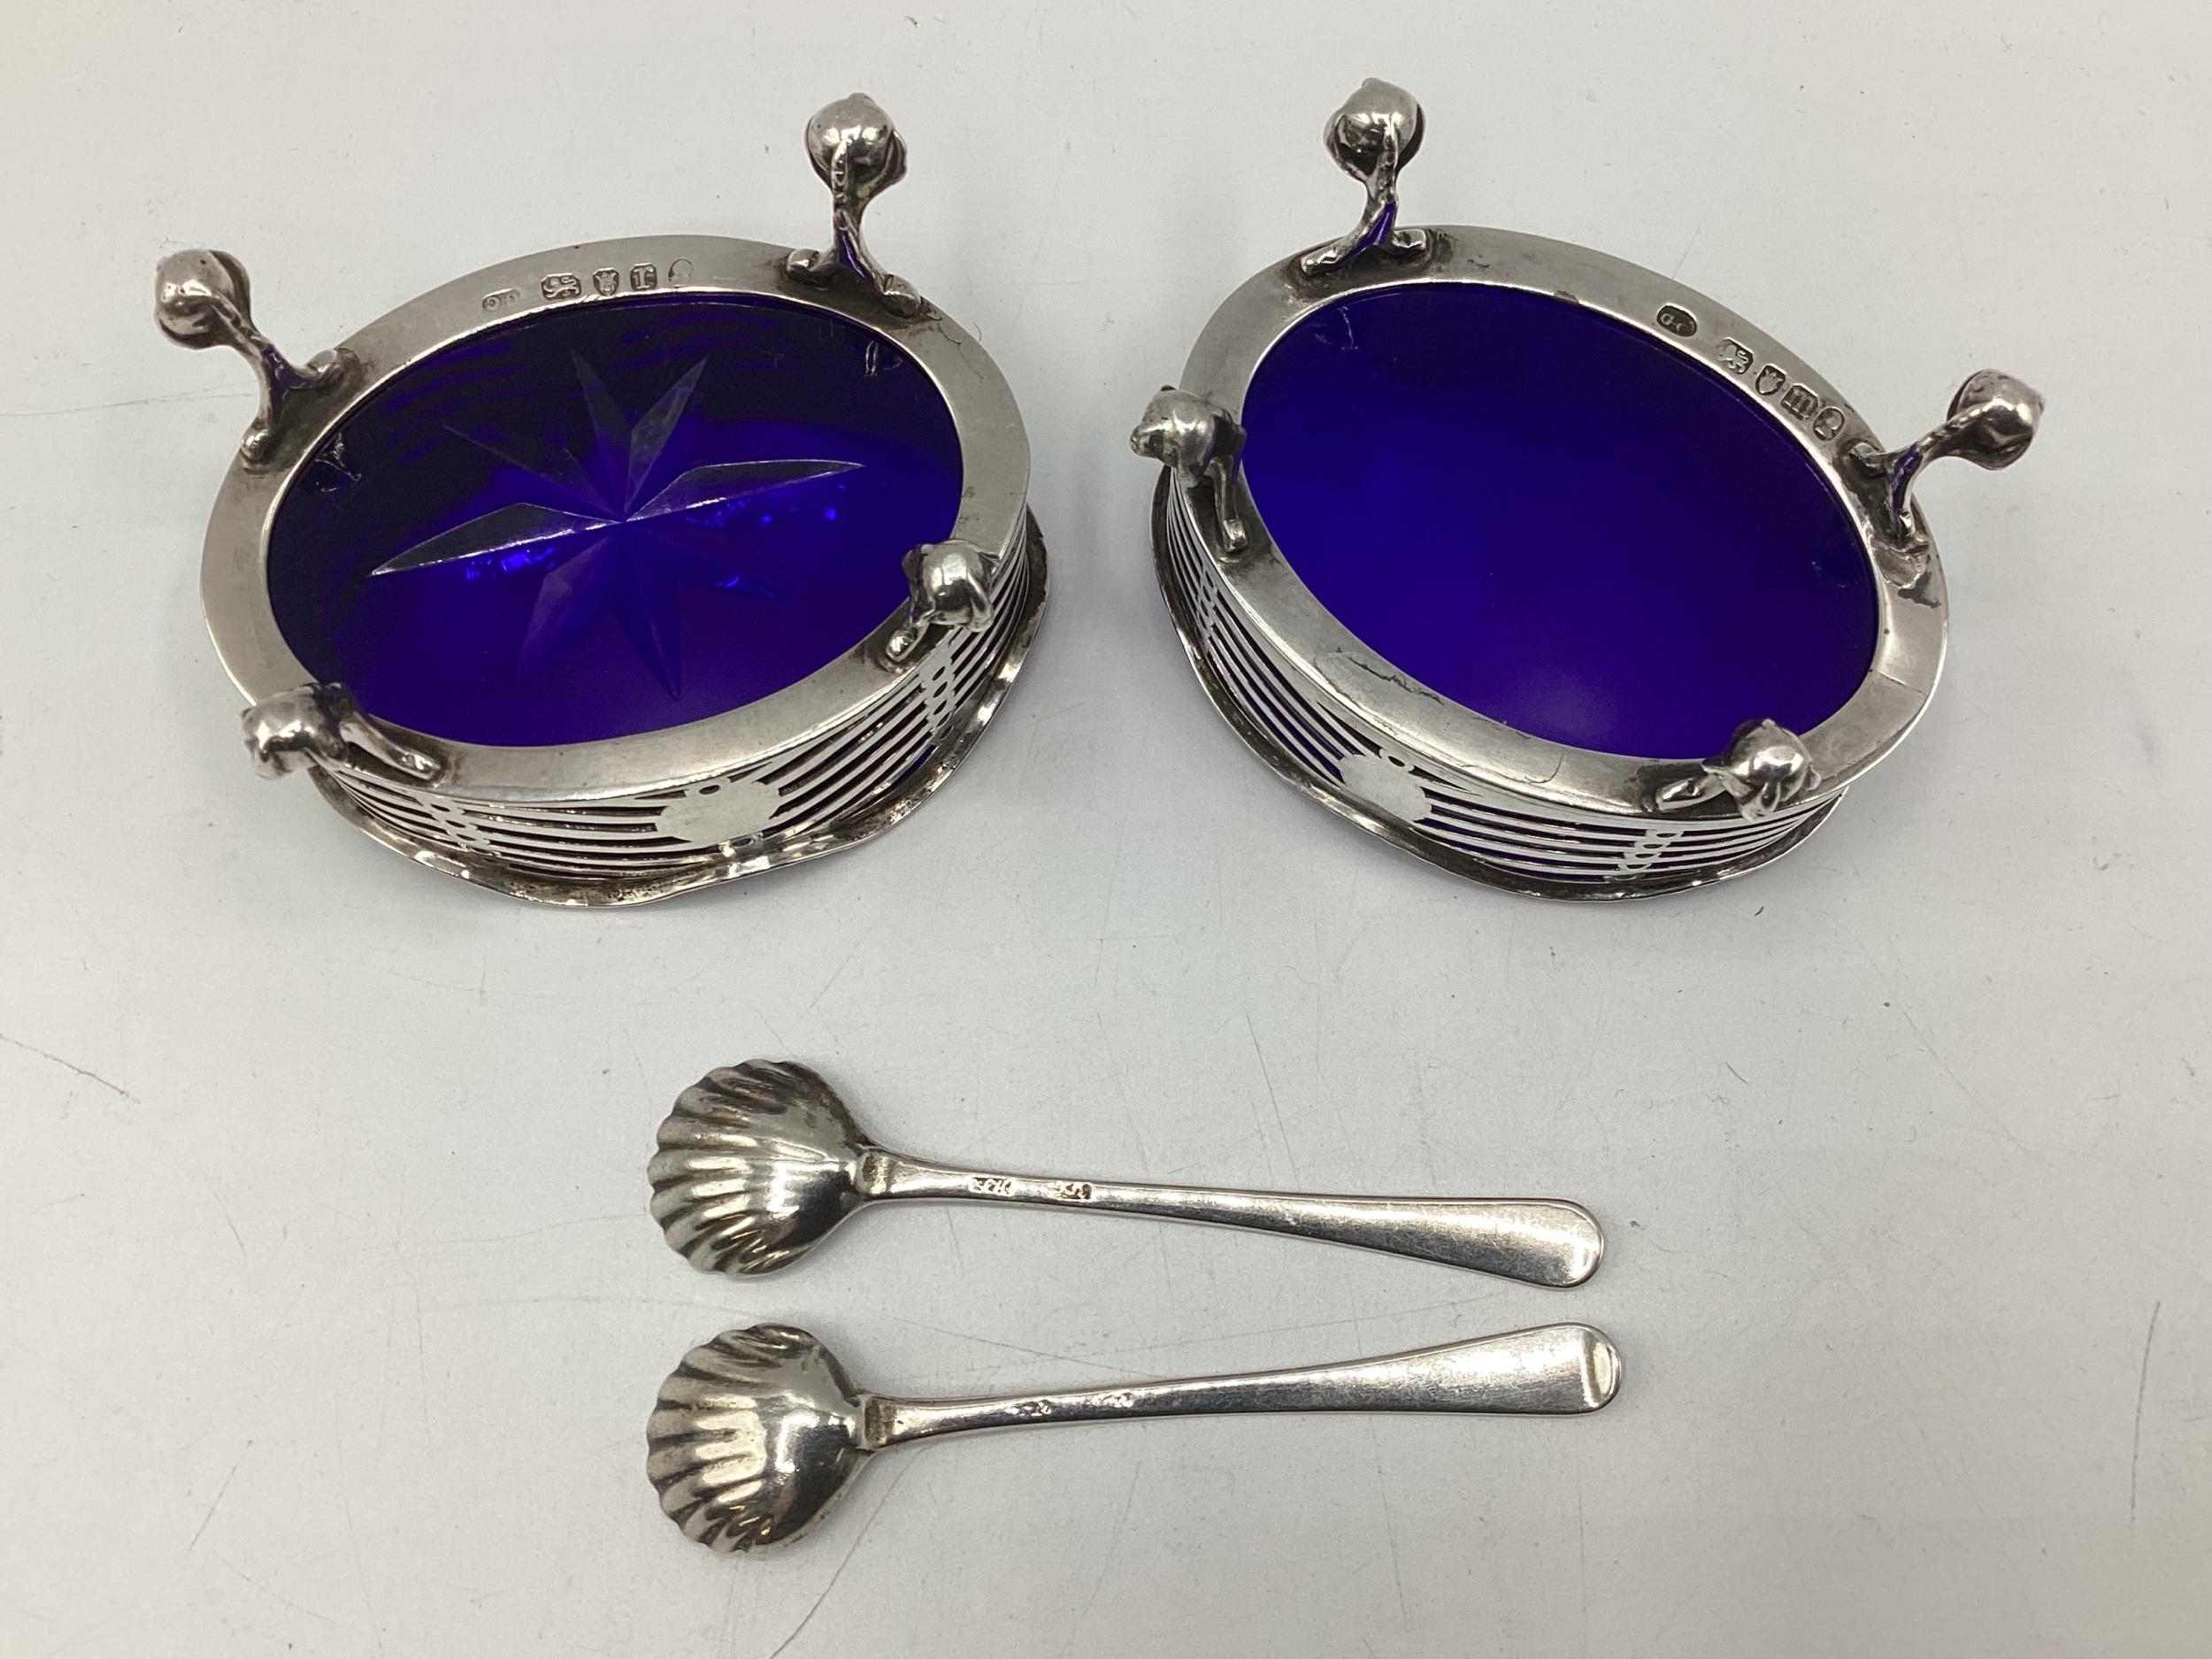 A pair of oval sterling silver salts with blue glass liners, GC London, George Chebsey, with - Image 2 of 2